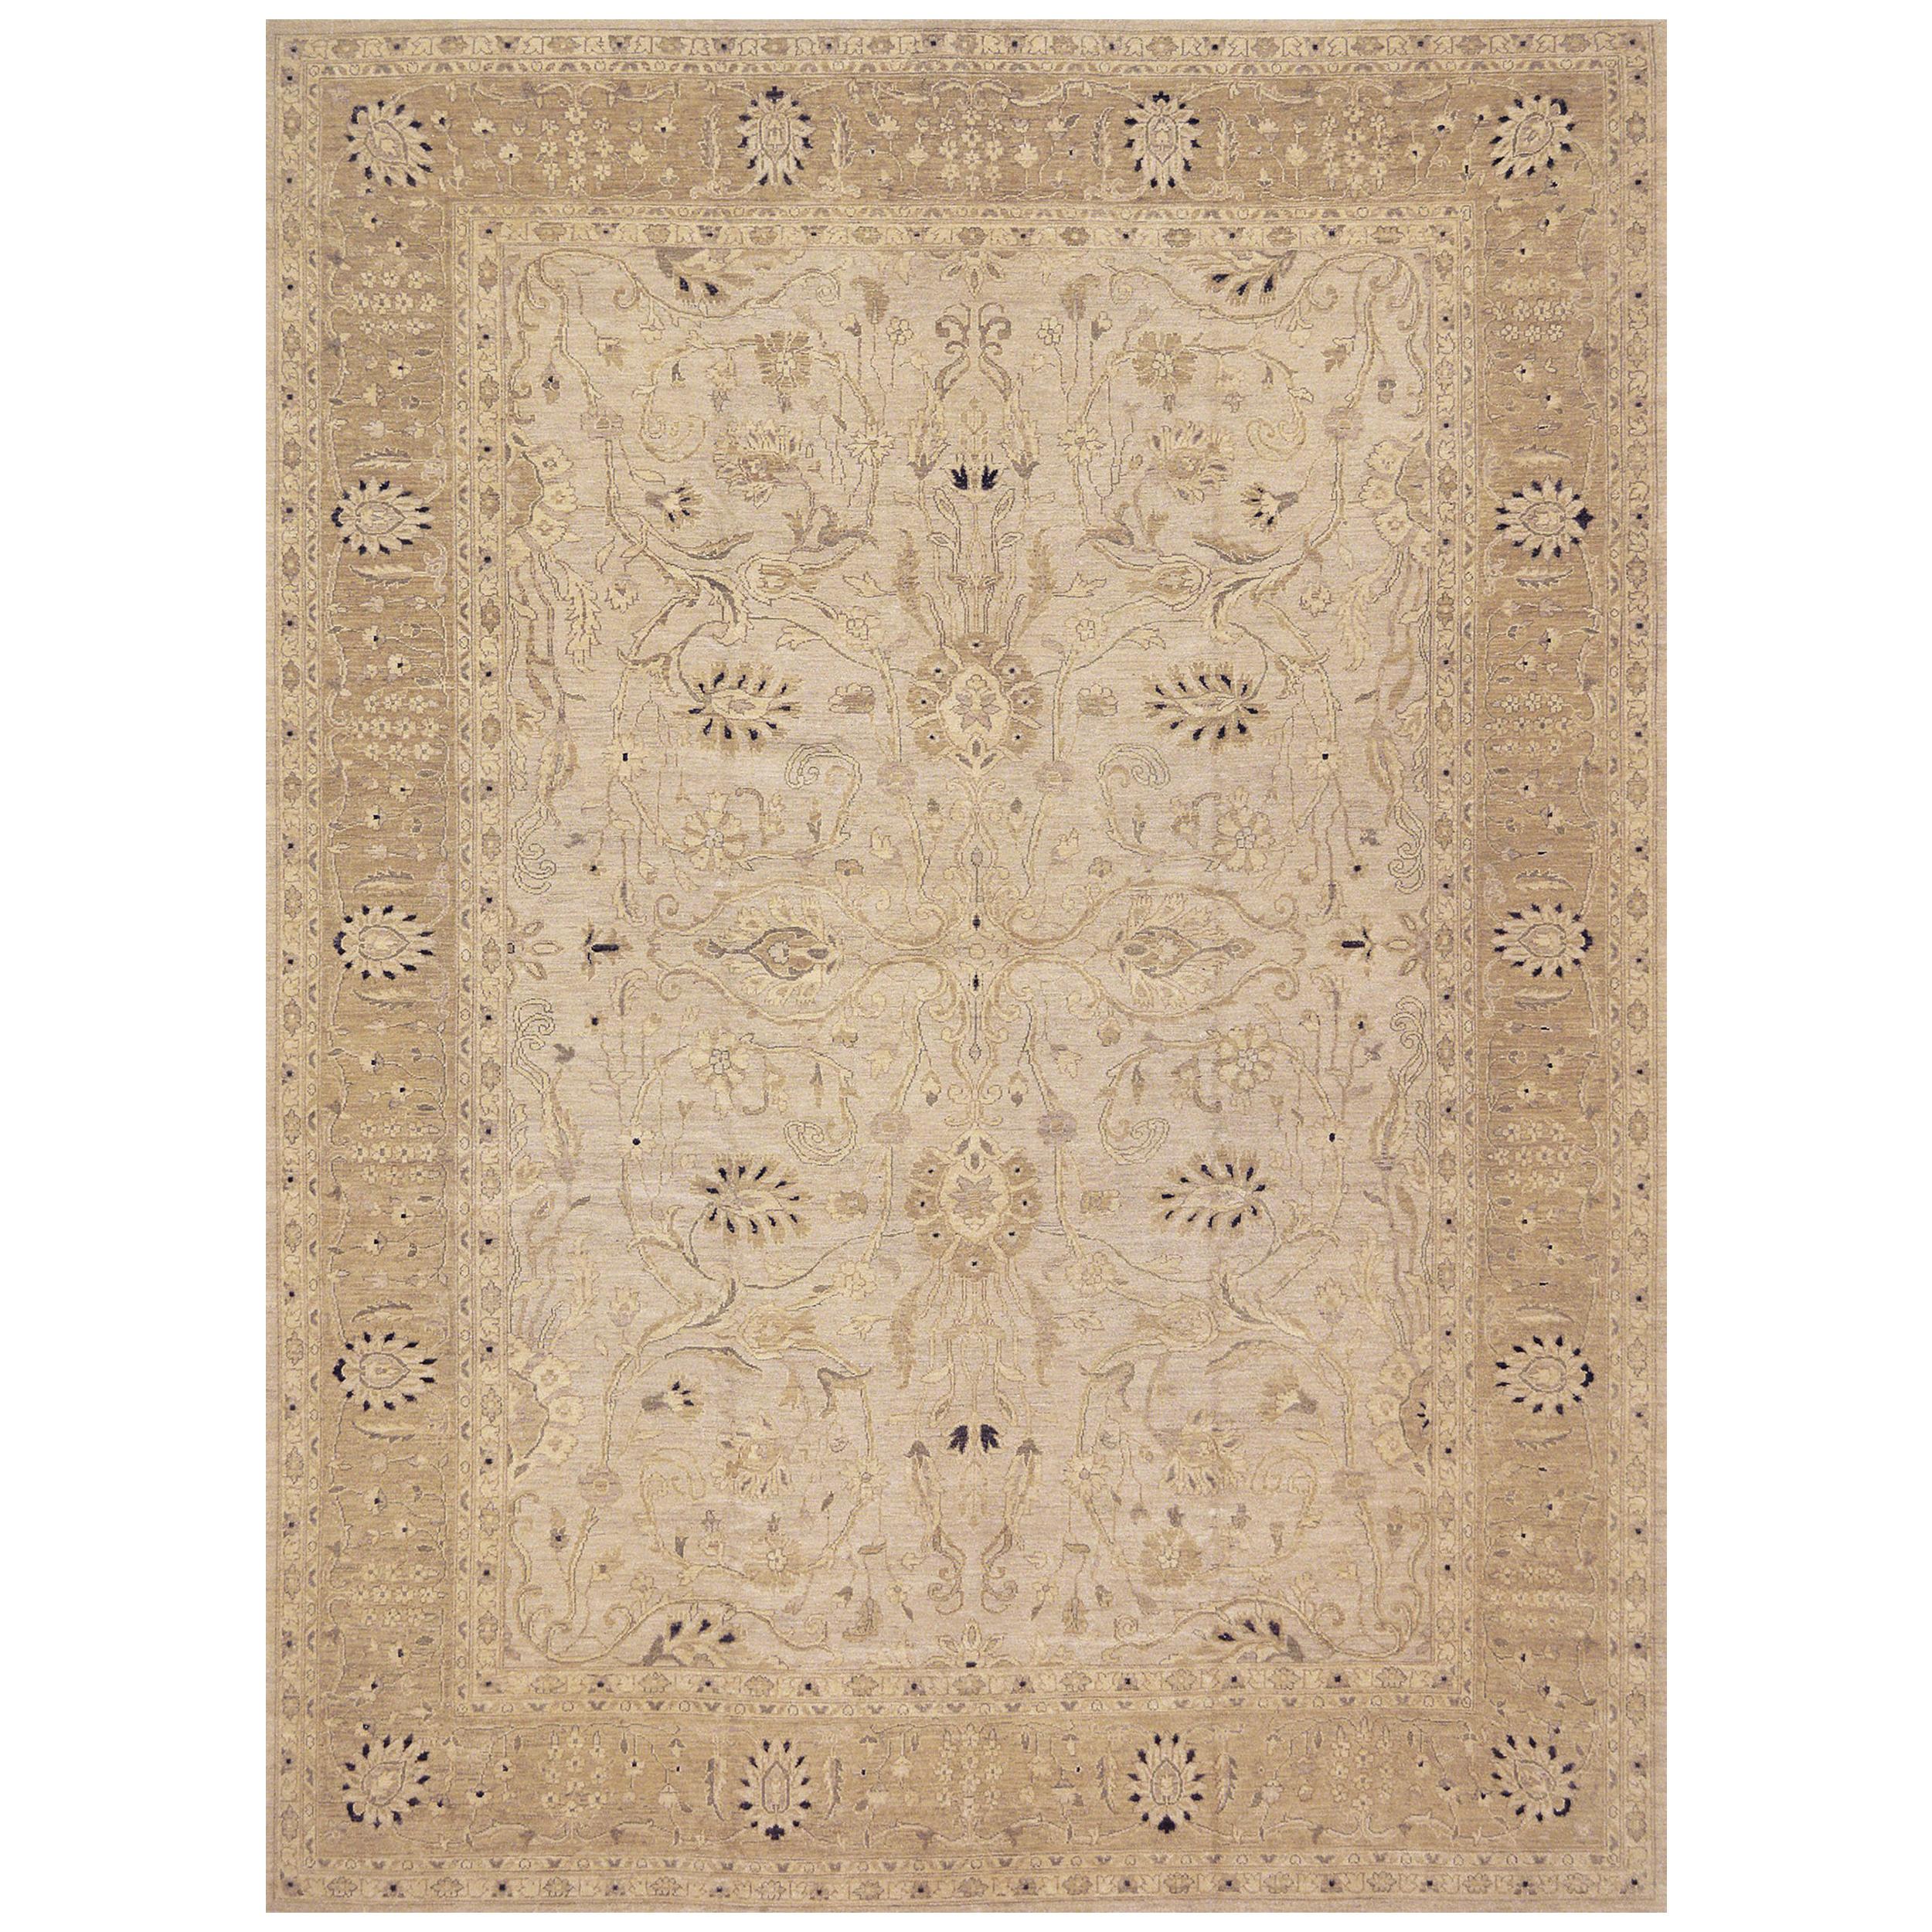 Handwoven Agra Inspired Wool Rug For Sale